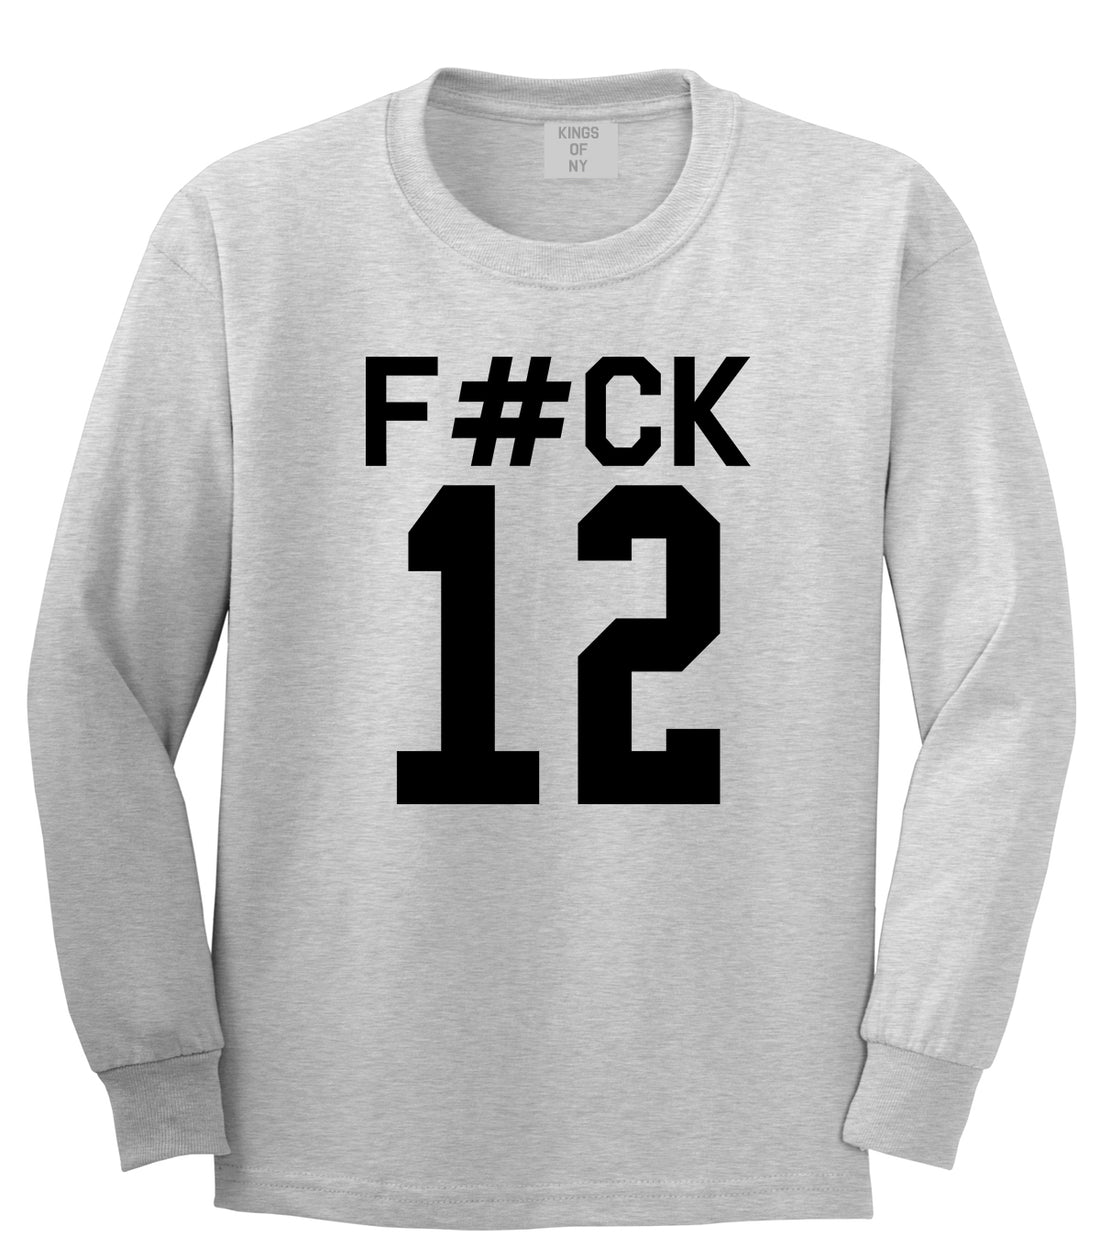 Fck 12 Police Brutality Mens Long Sleeve T-Shirt Grey by Kings Of NY